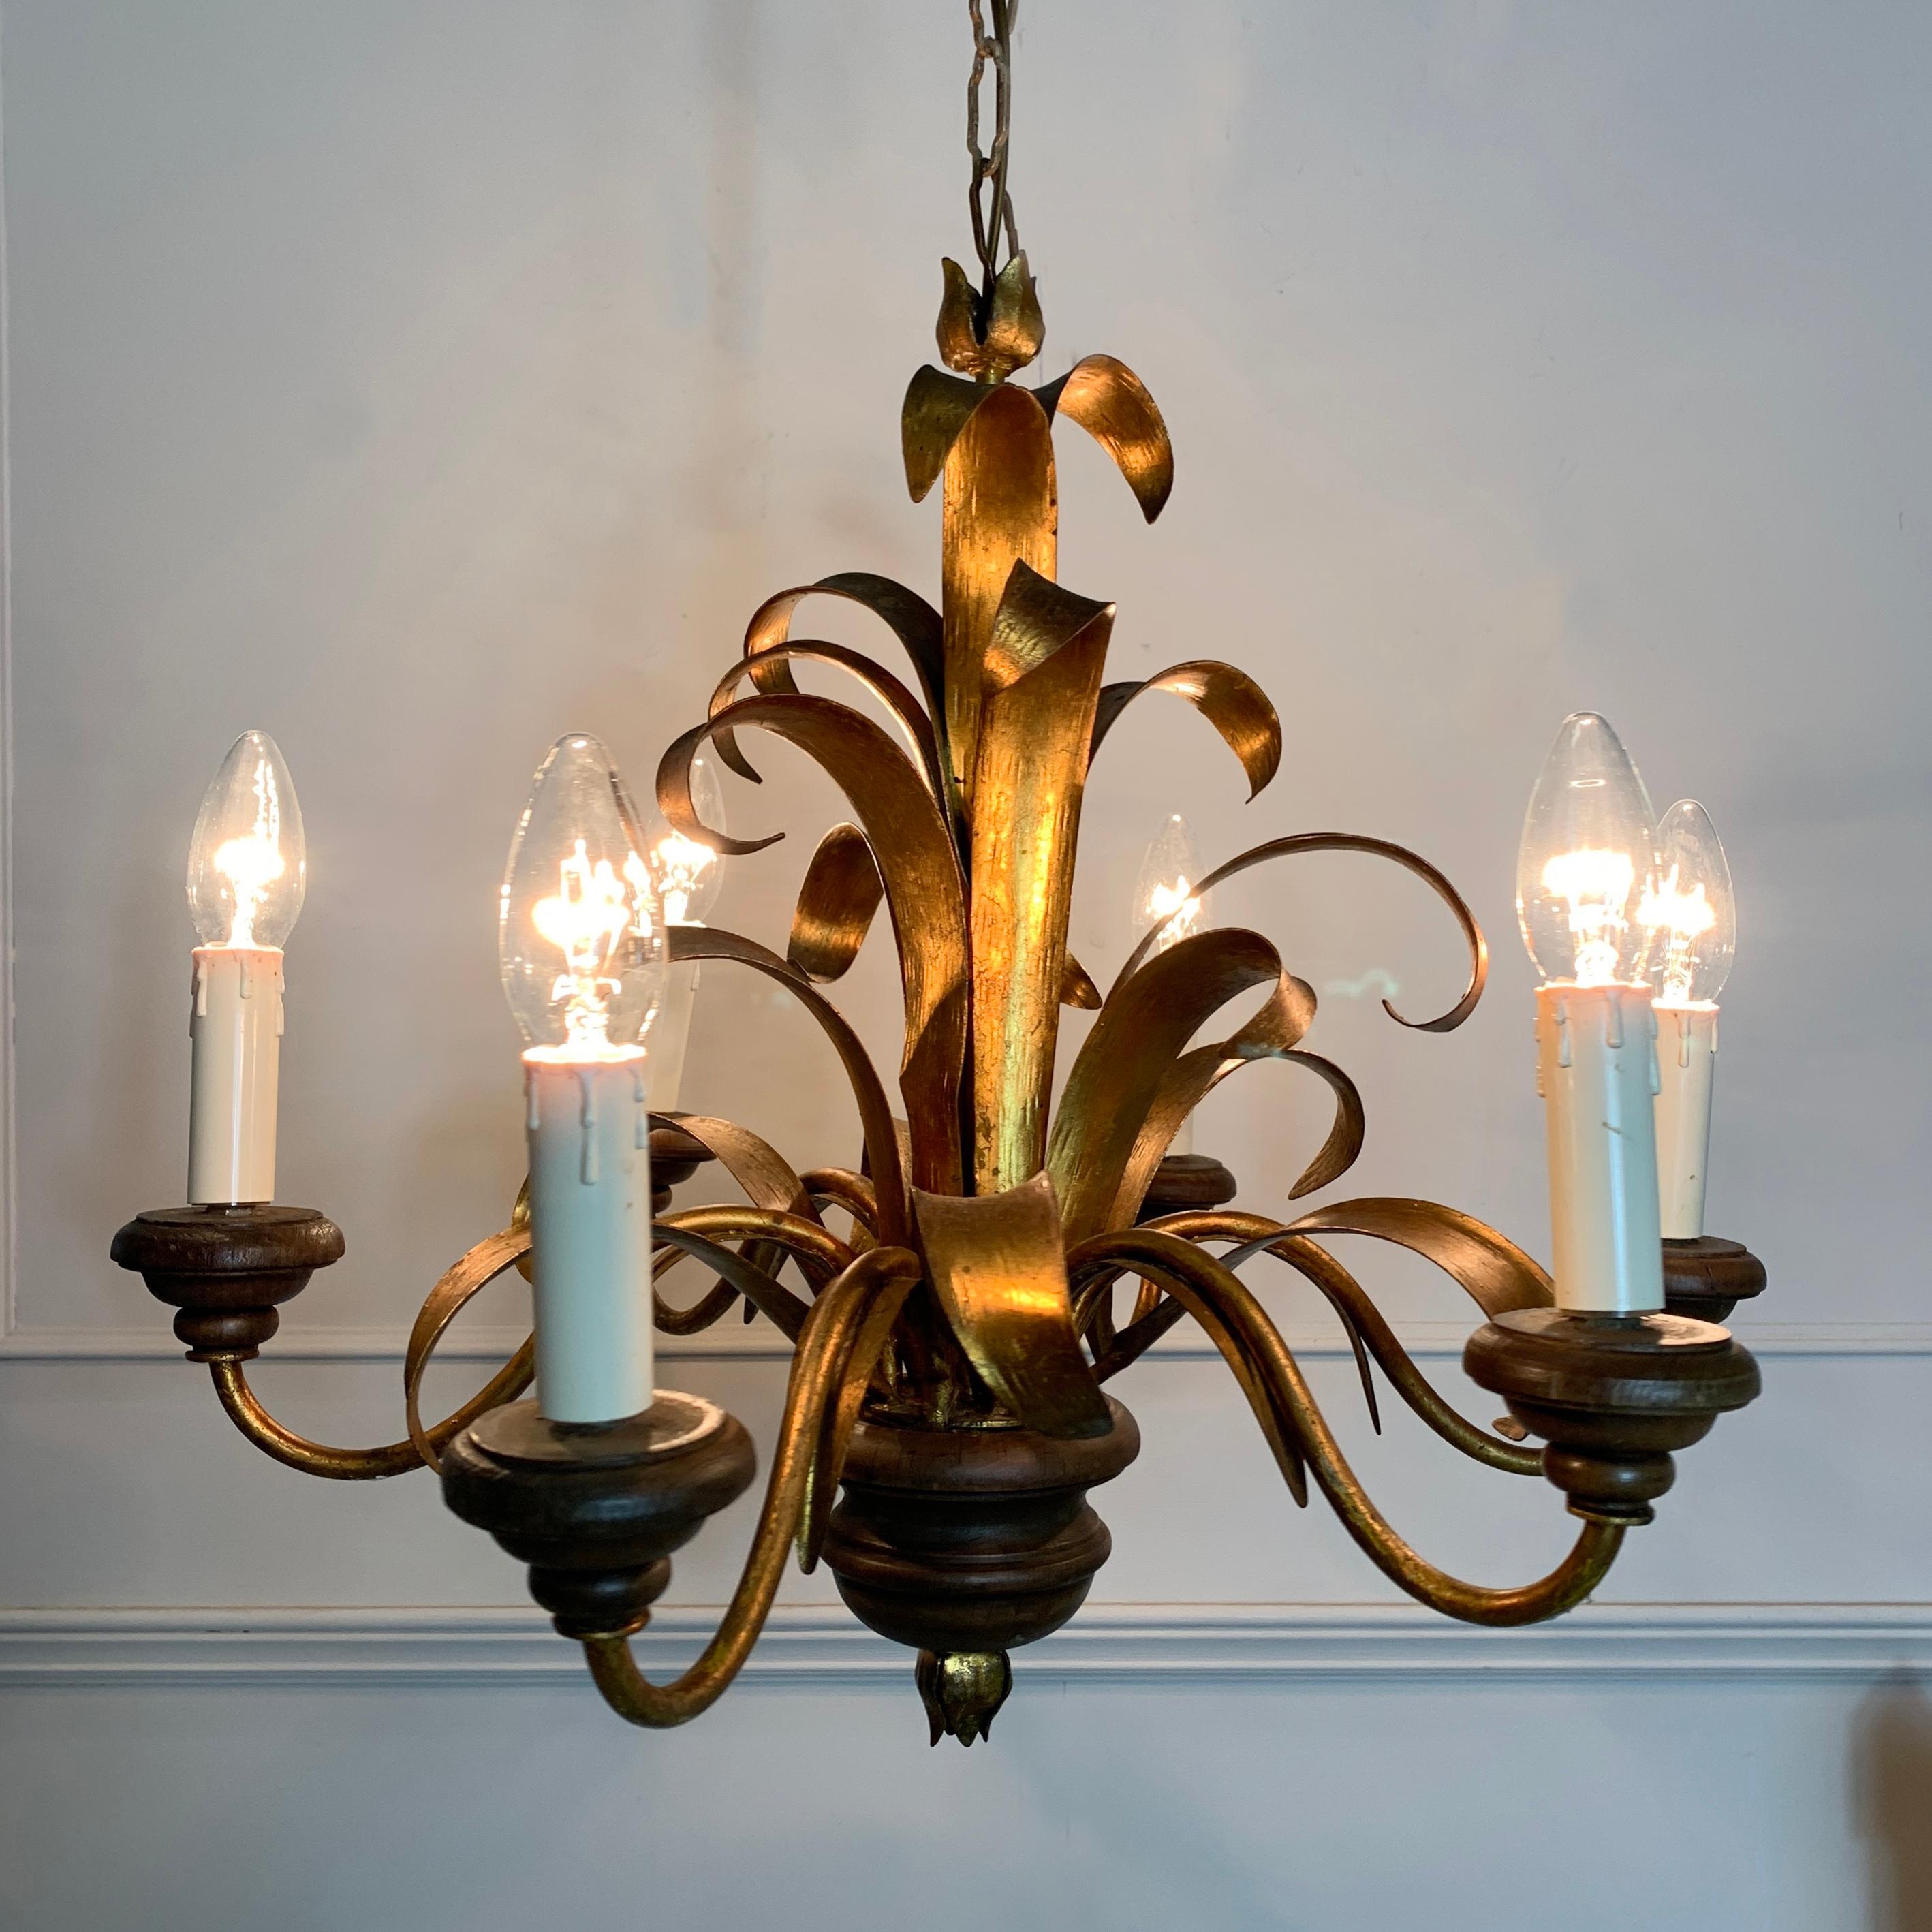 Italian Broad Leaf Gilt Chandelier, C 1970’s
Wide Gilt Metal Leaves Form A Frond At The Centre Of This Chandelier
There Are 5 Metal Arms With Turned Wooden Cups Holding 5 Lampholders, E14
There Is Also A Turned Wooden Finial Base With Gilt Leaf